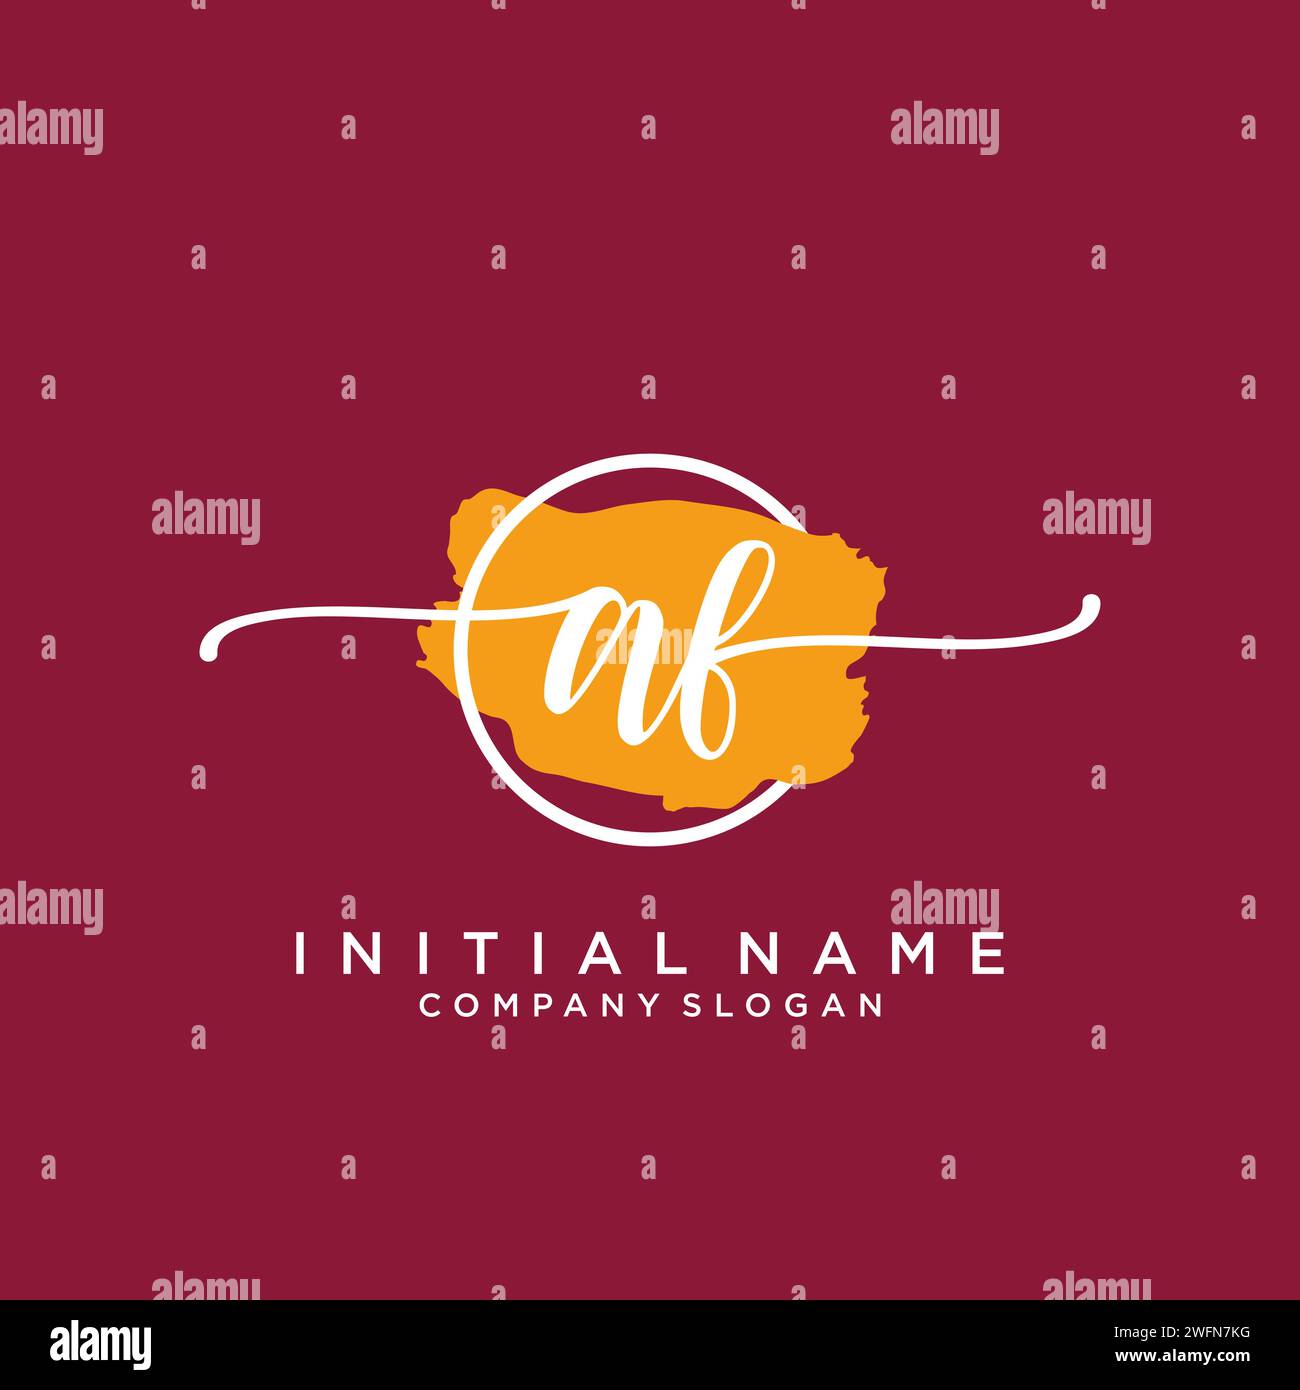 AF Initial handwriting logo with circle Stock Vector